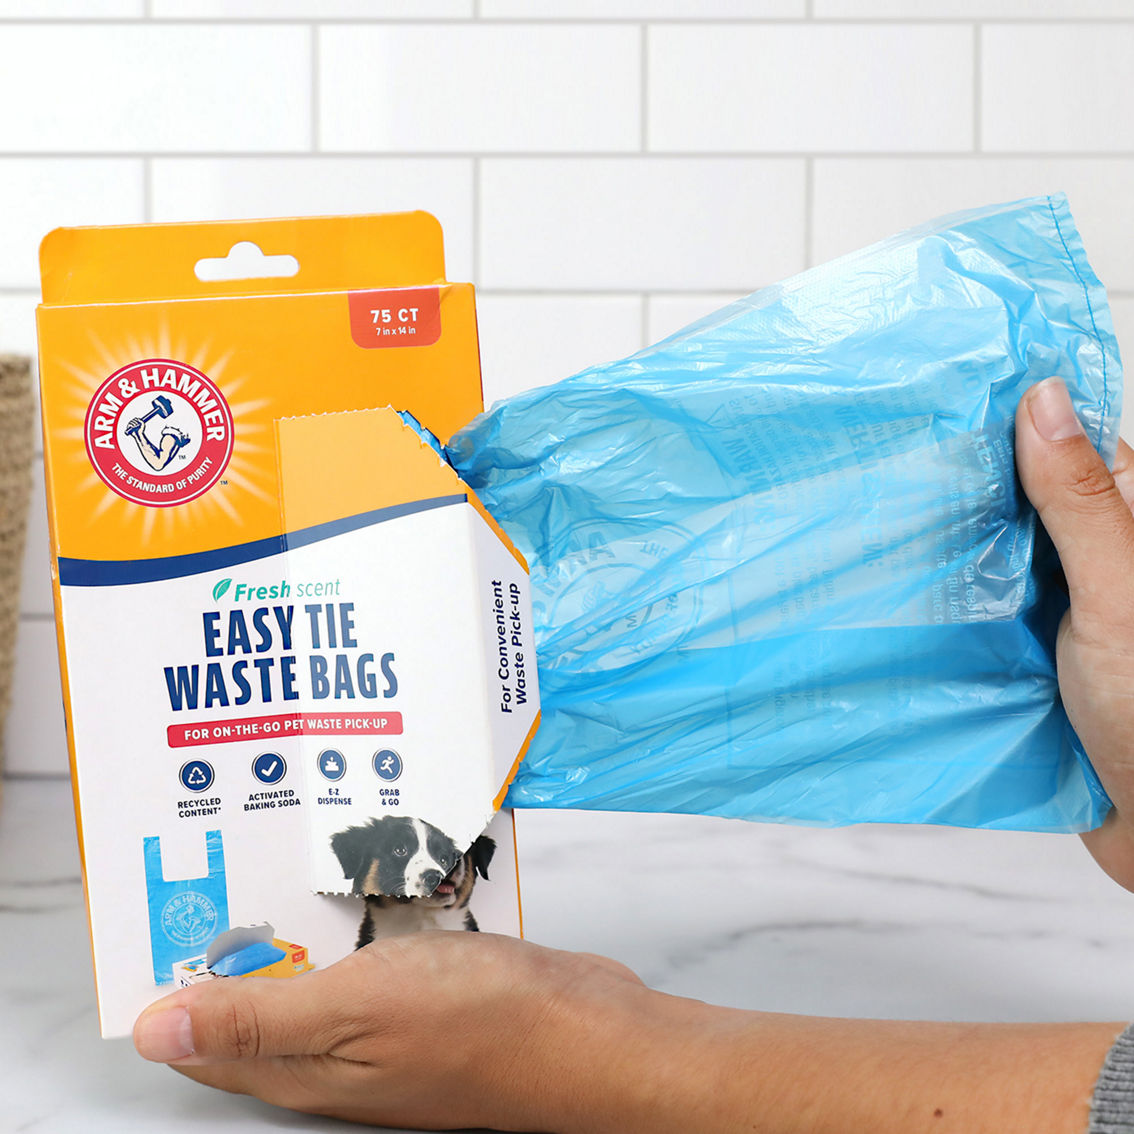 Petmate Arm & Hammer Easy Tie Dog Waste Bags 75 ct. - Image 4 of 5